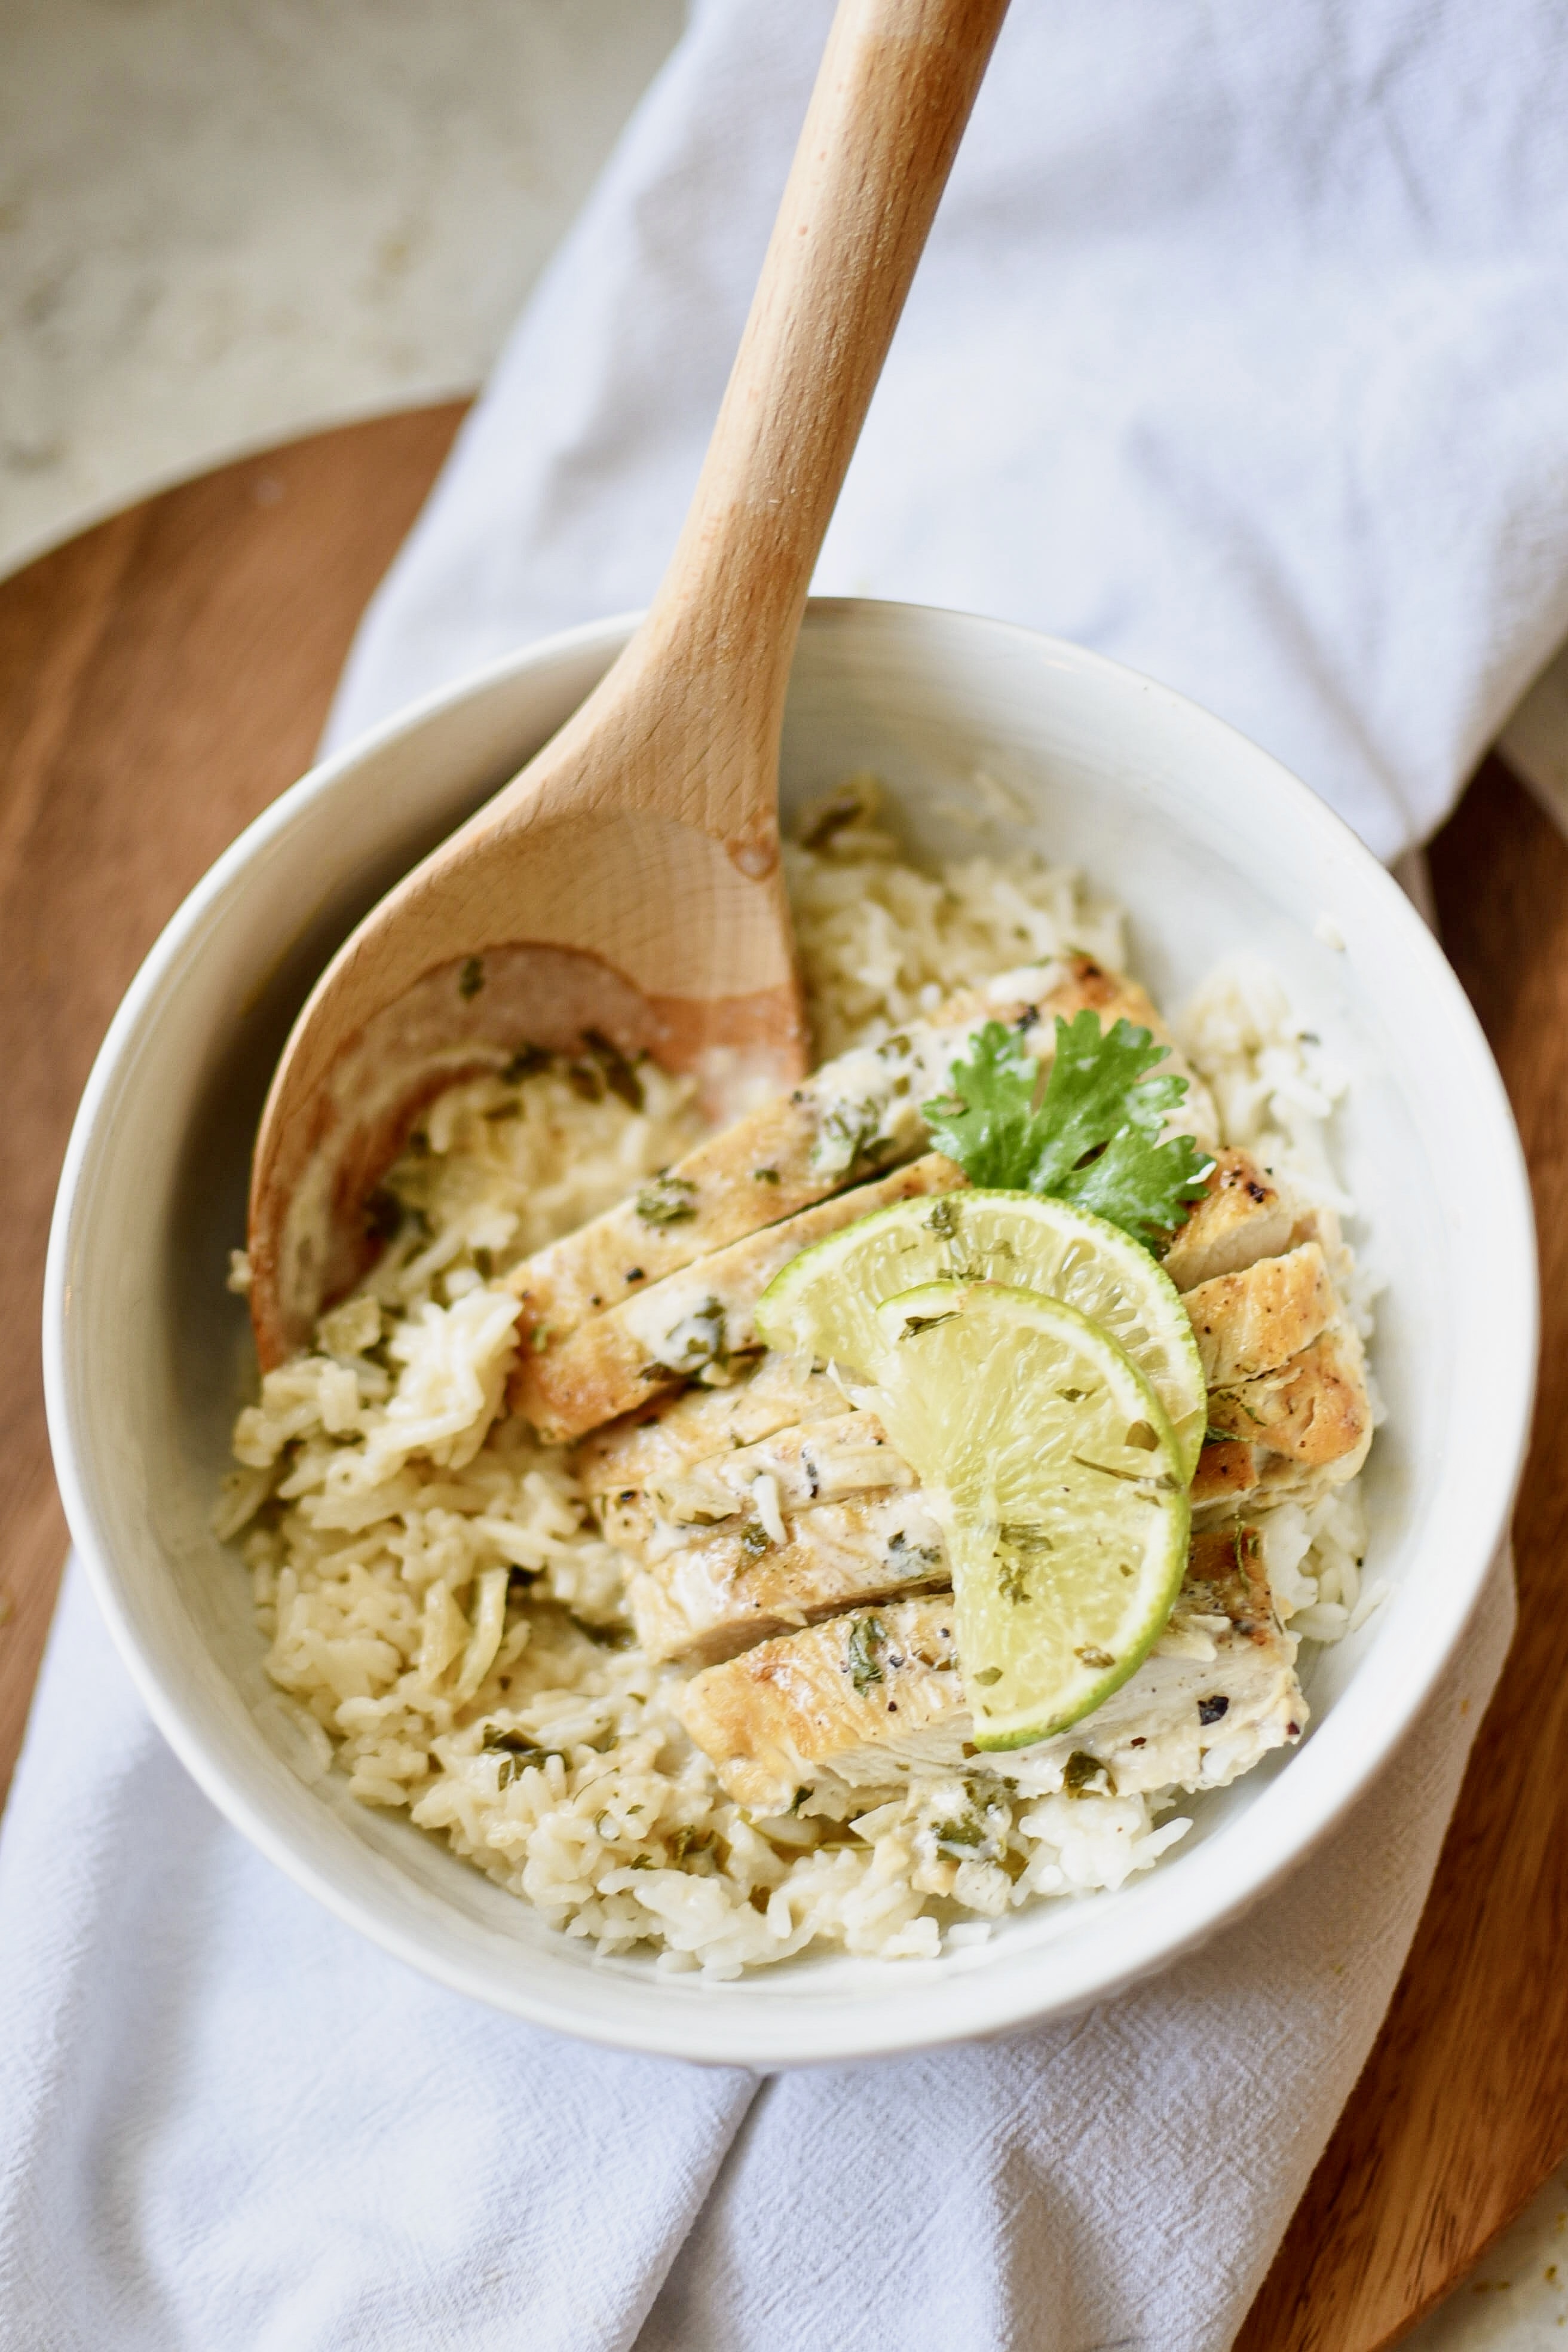 Super easy, this meal is a family favorite. This coconut lime chicken bowl is comfort food. Creamy, satisfying and full of healthy fats. 